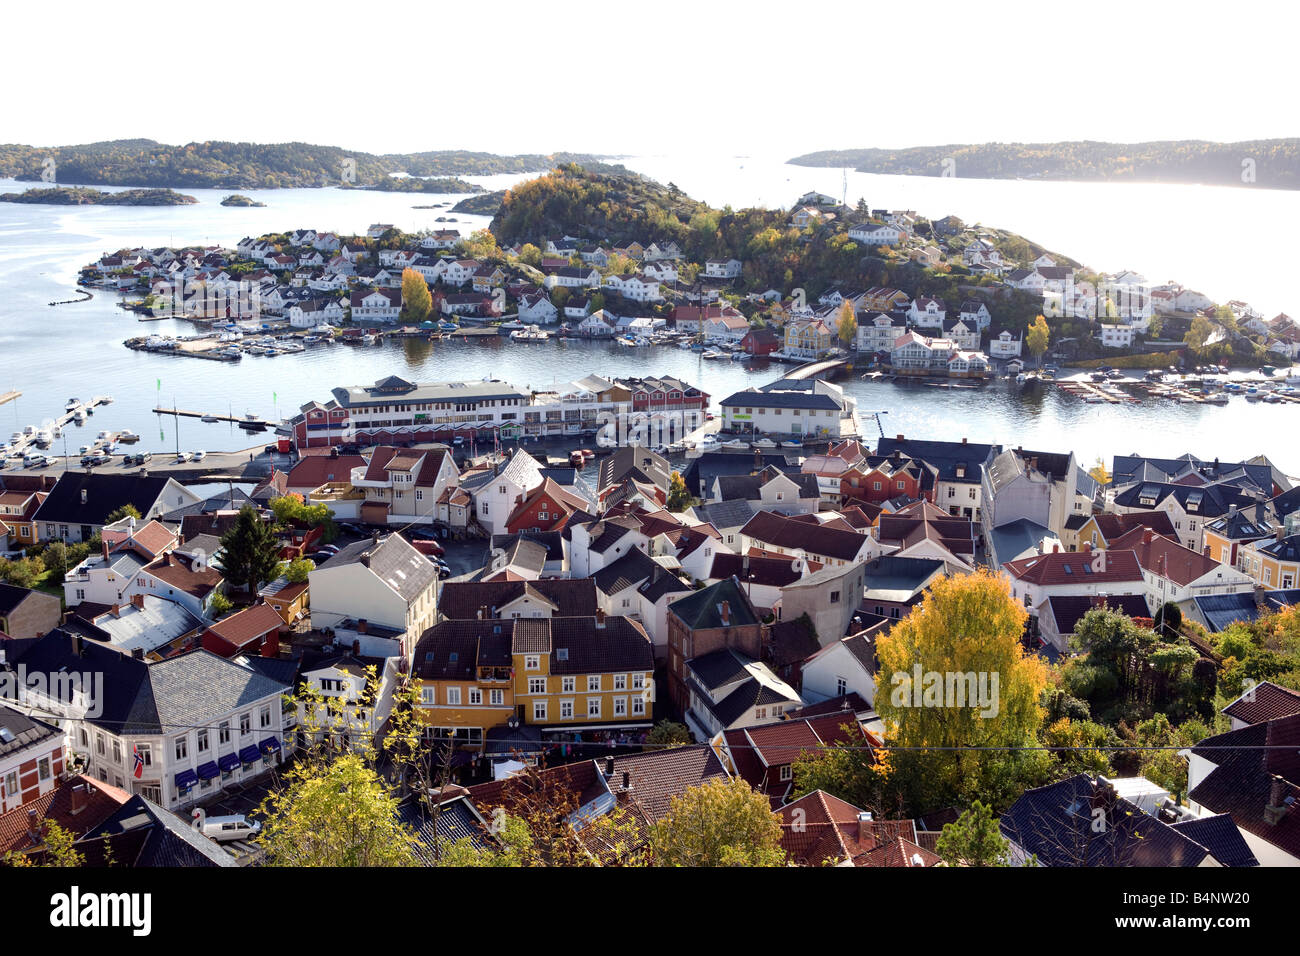 View of the town of Kragero in the Telemark region of Norway Stock Photo